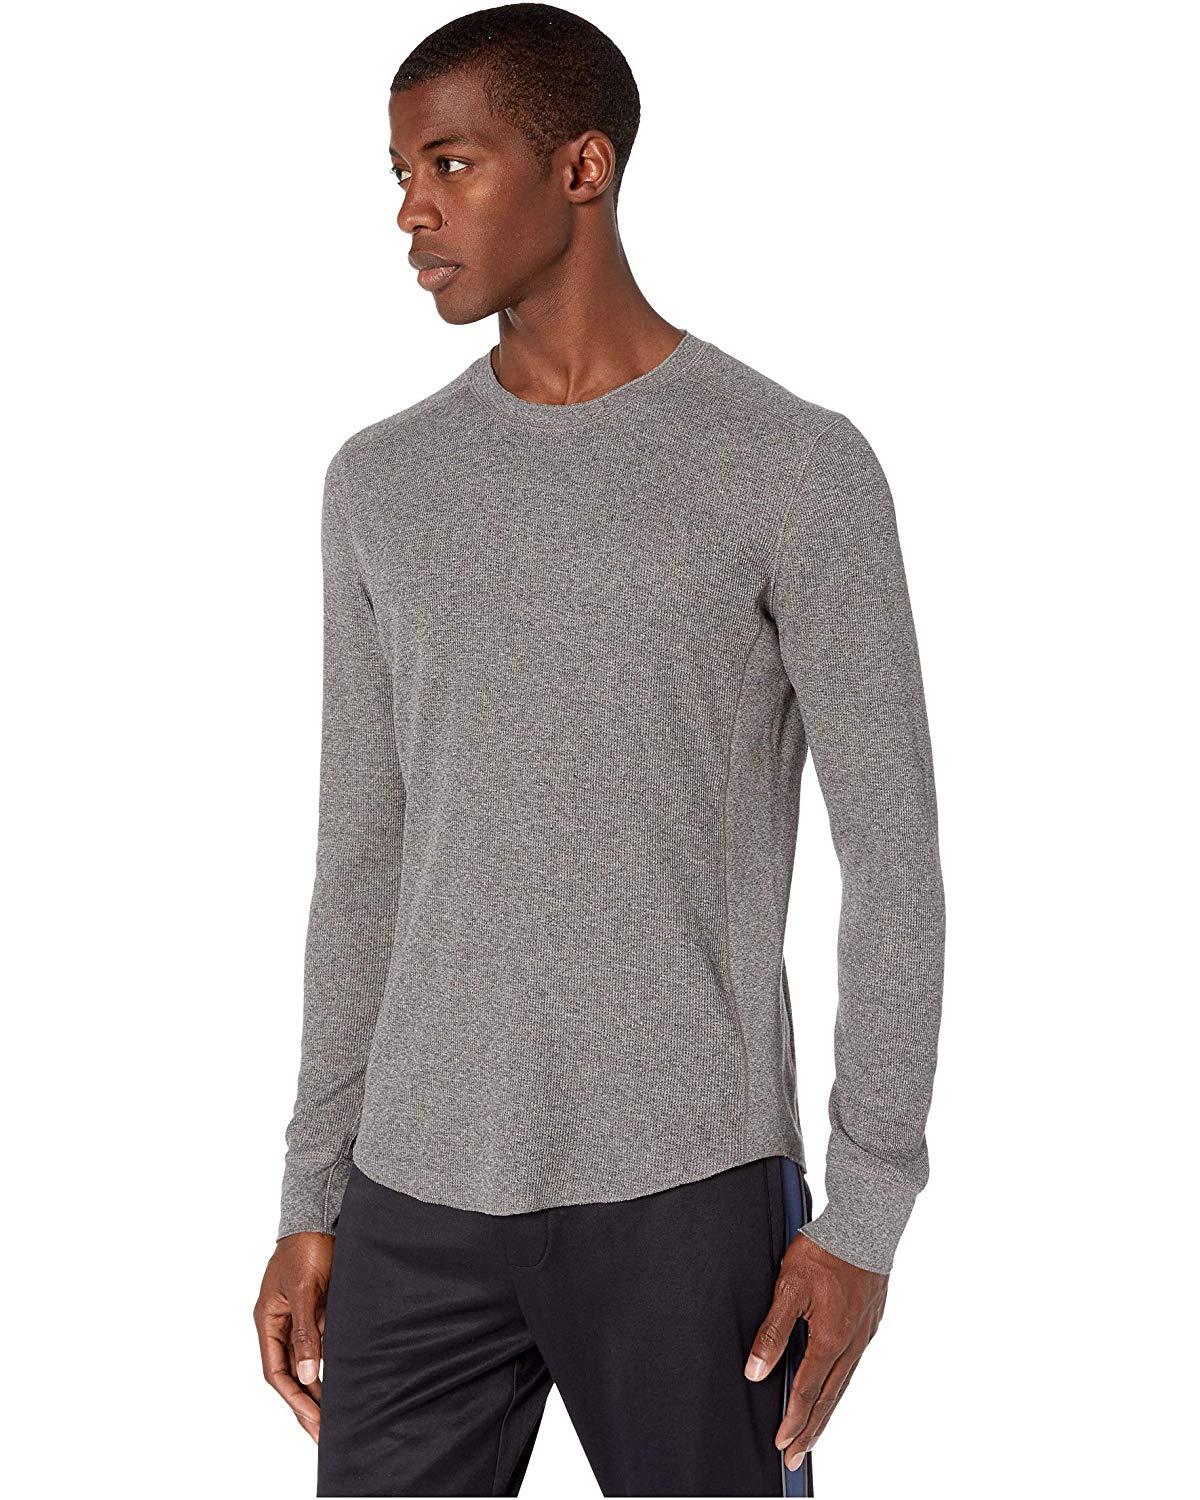 Vince Cotton Waffle Long Sleeve in Gray for Men - Lyst